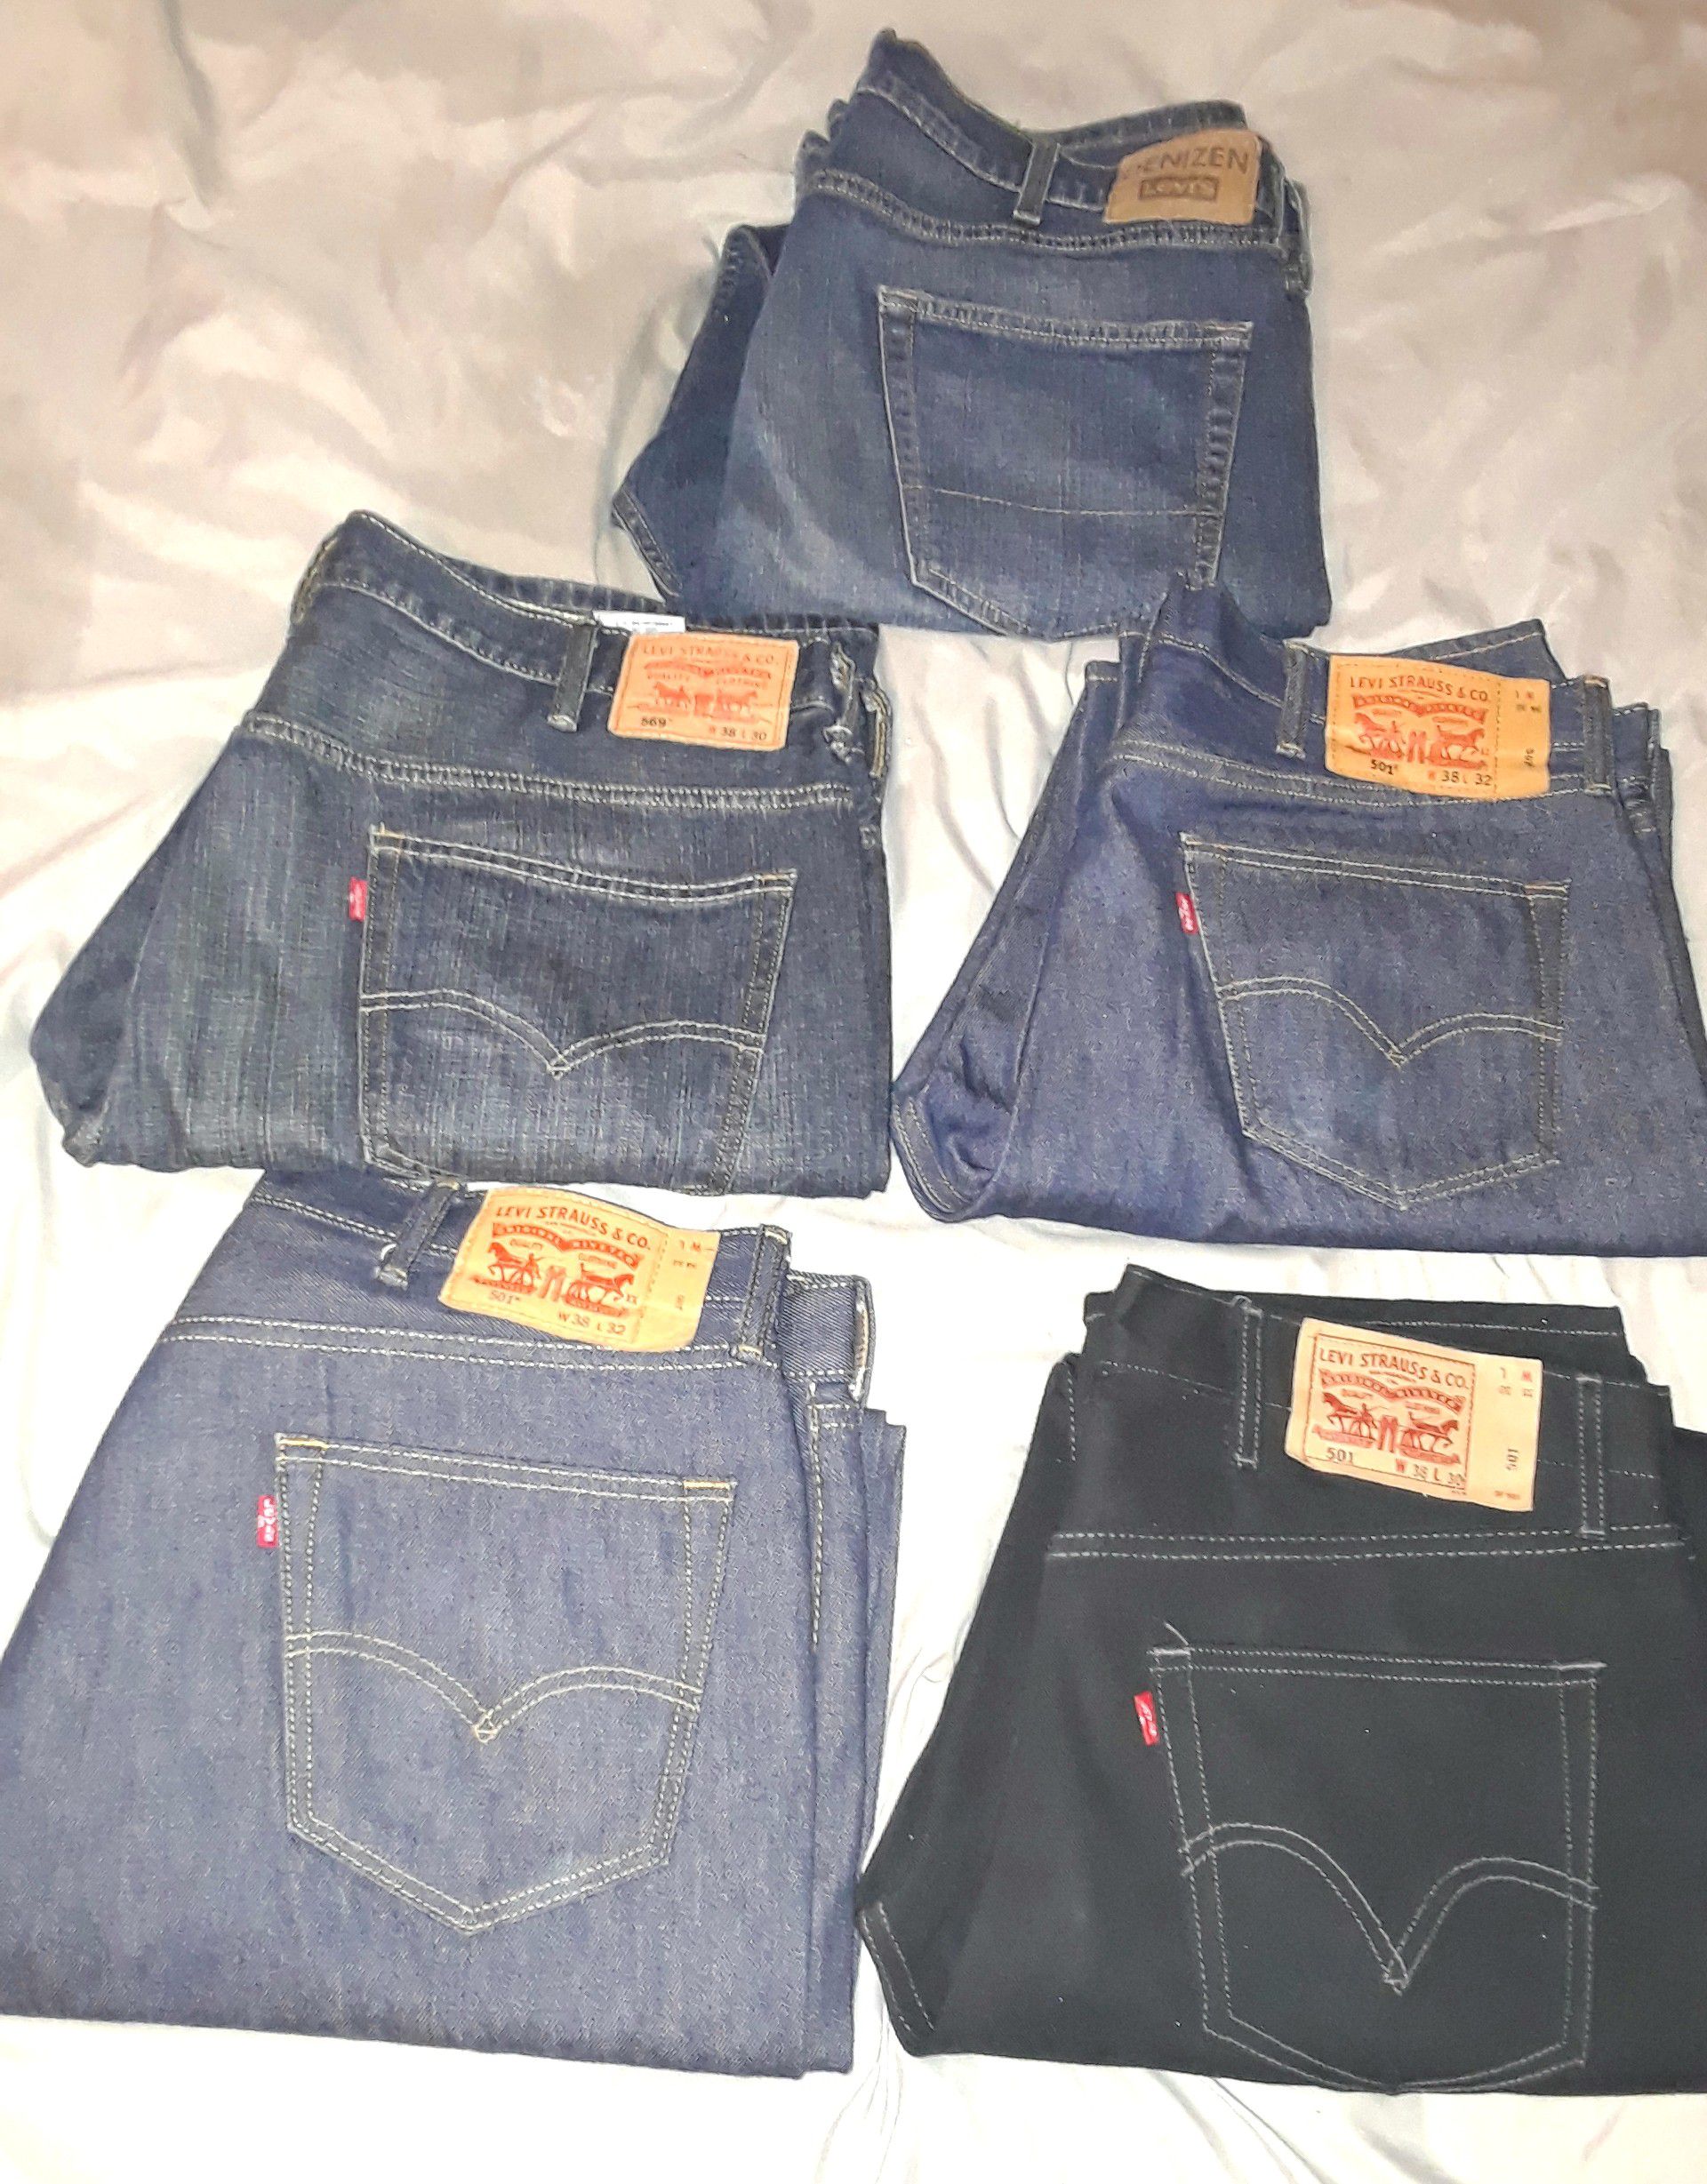 LEVI' S MEN PANTS BUNDLE SIZE 38×32 ALL IN EXCELLENT CONDITION AS U CAN SEE IN THE PICTURE SELLING THEM TOGETHER AS A BUNDLE FOR $95